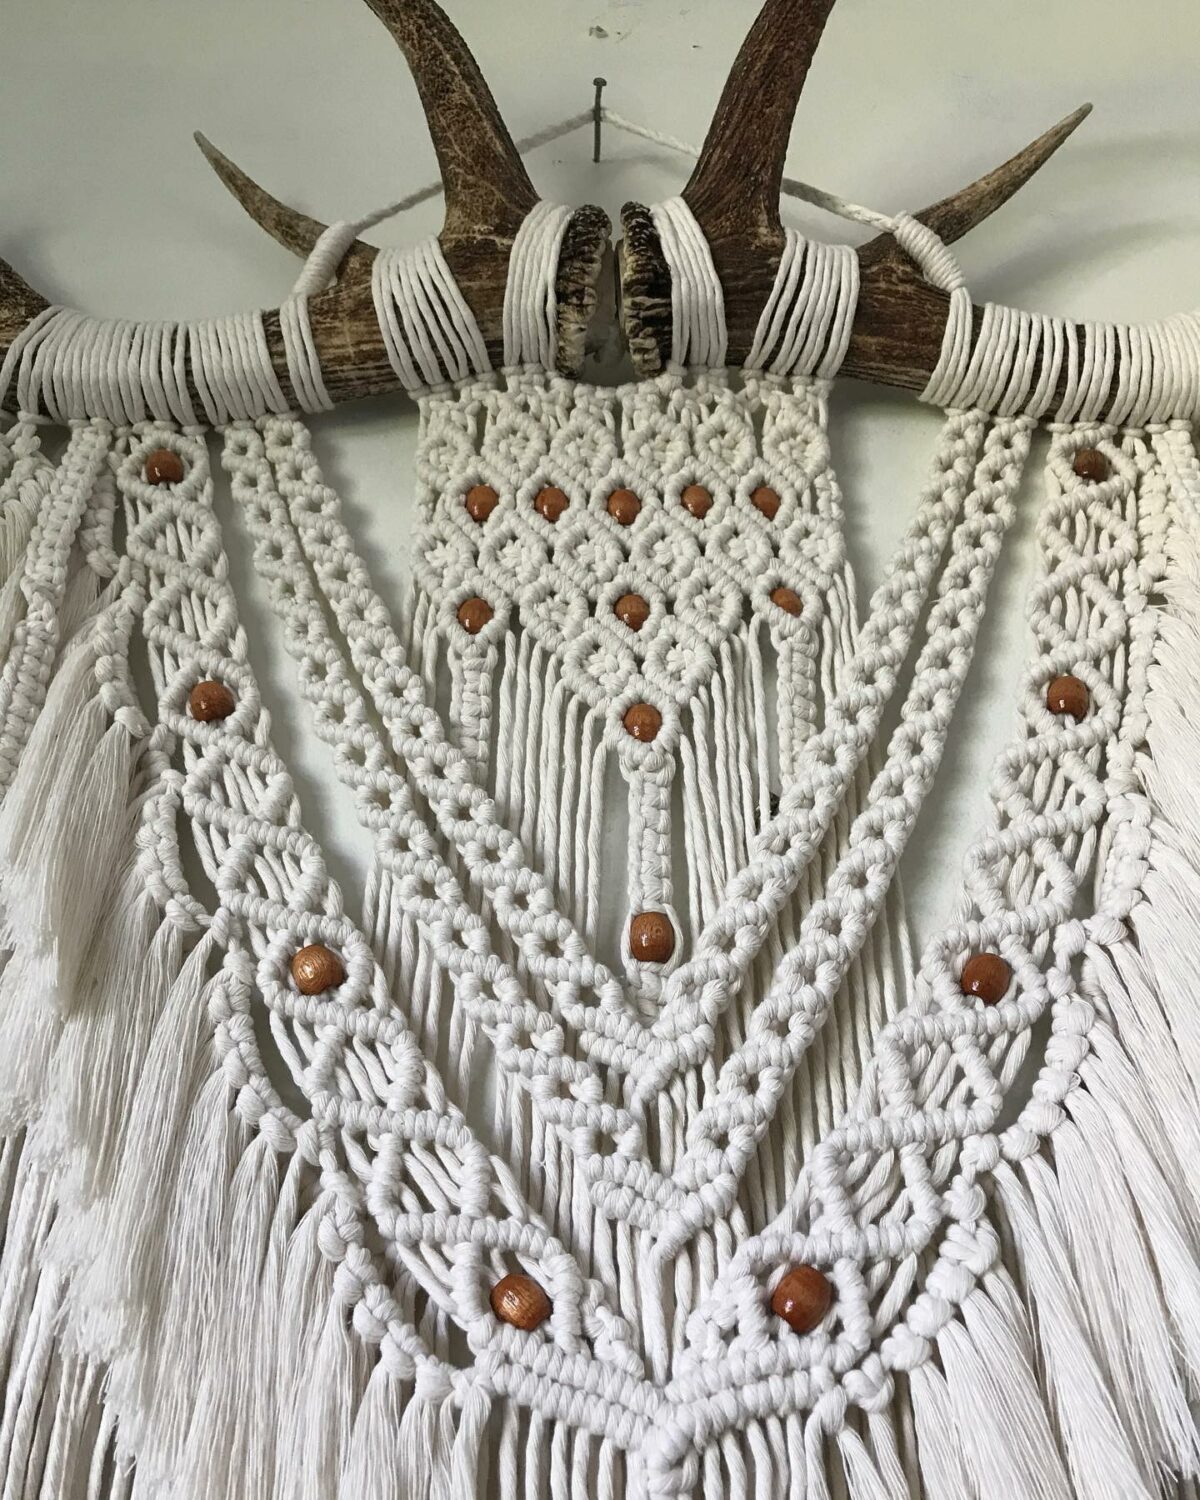 Macrame artwork on antlers with beading details